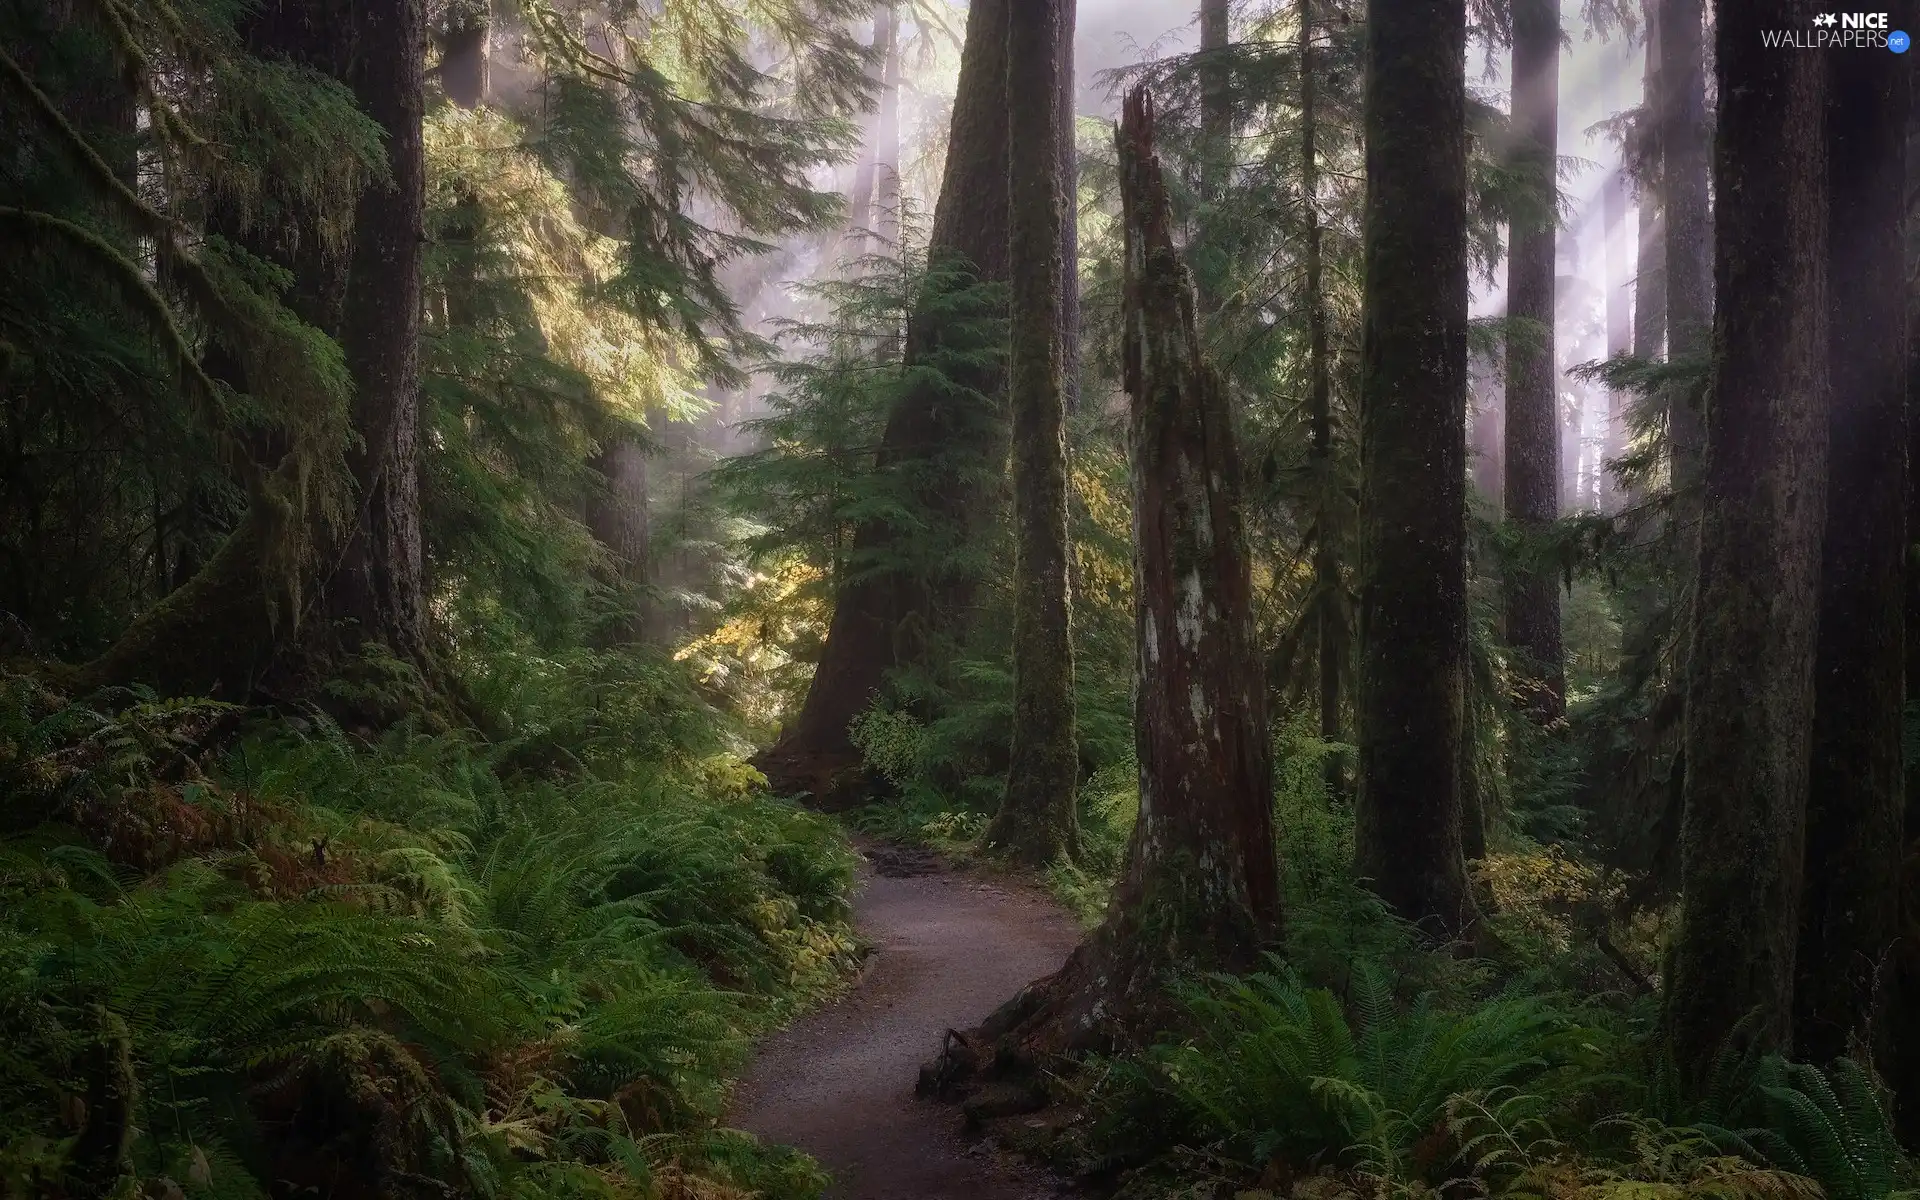 Washington State, The United States, Olympic National Park, forest, Path, fern, viewes, light breaking through sky, trees